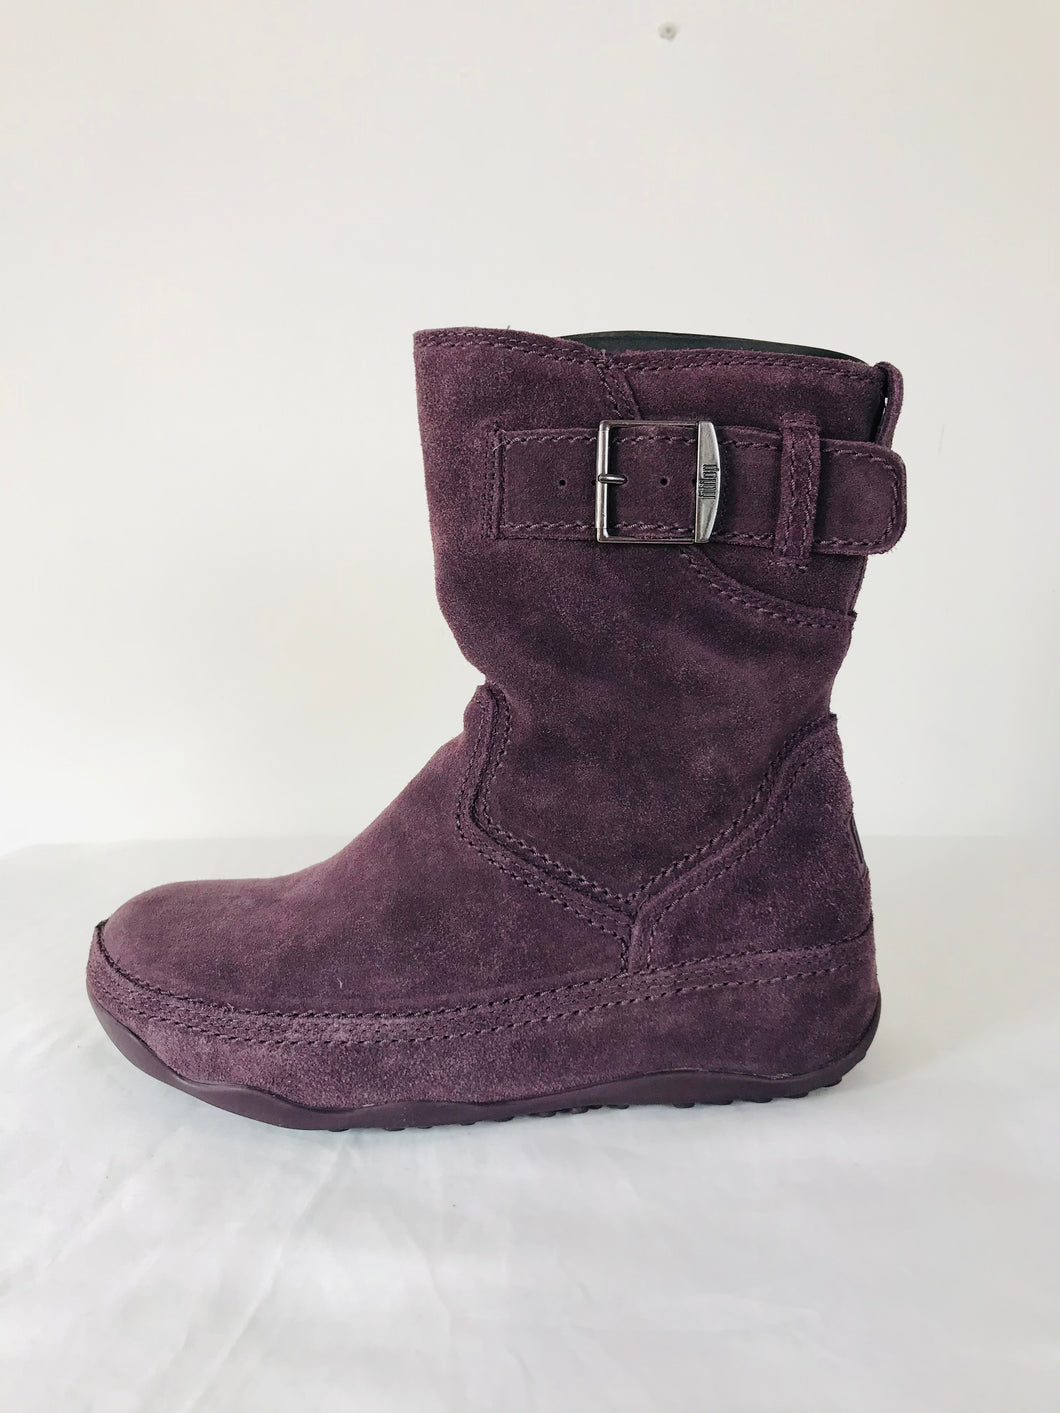 Fitflop Women’s Short Suede Superboot Boots NWT | UK5 | Amethyst Purple